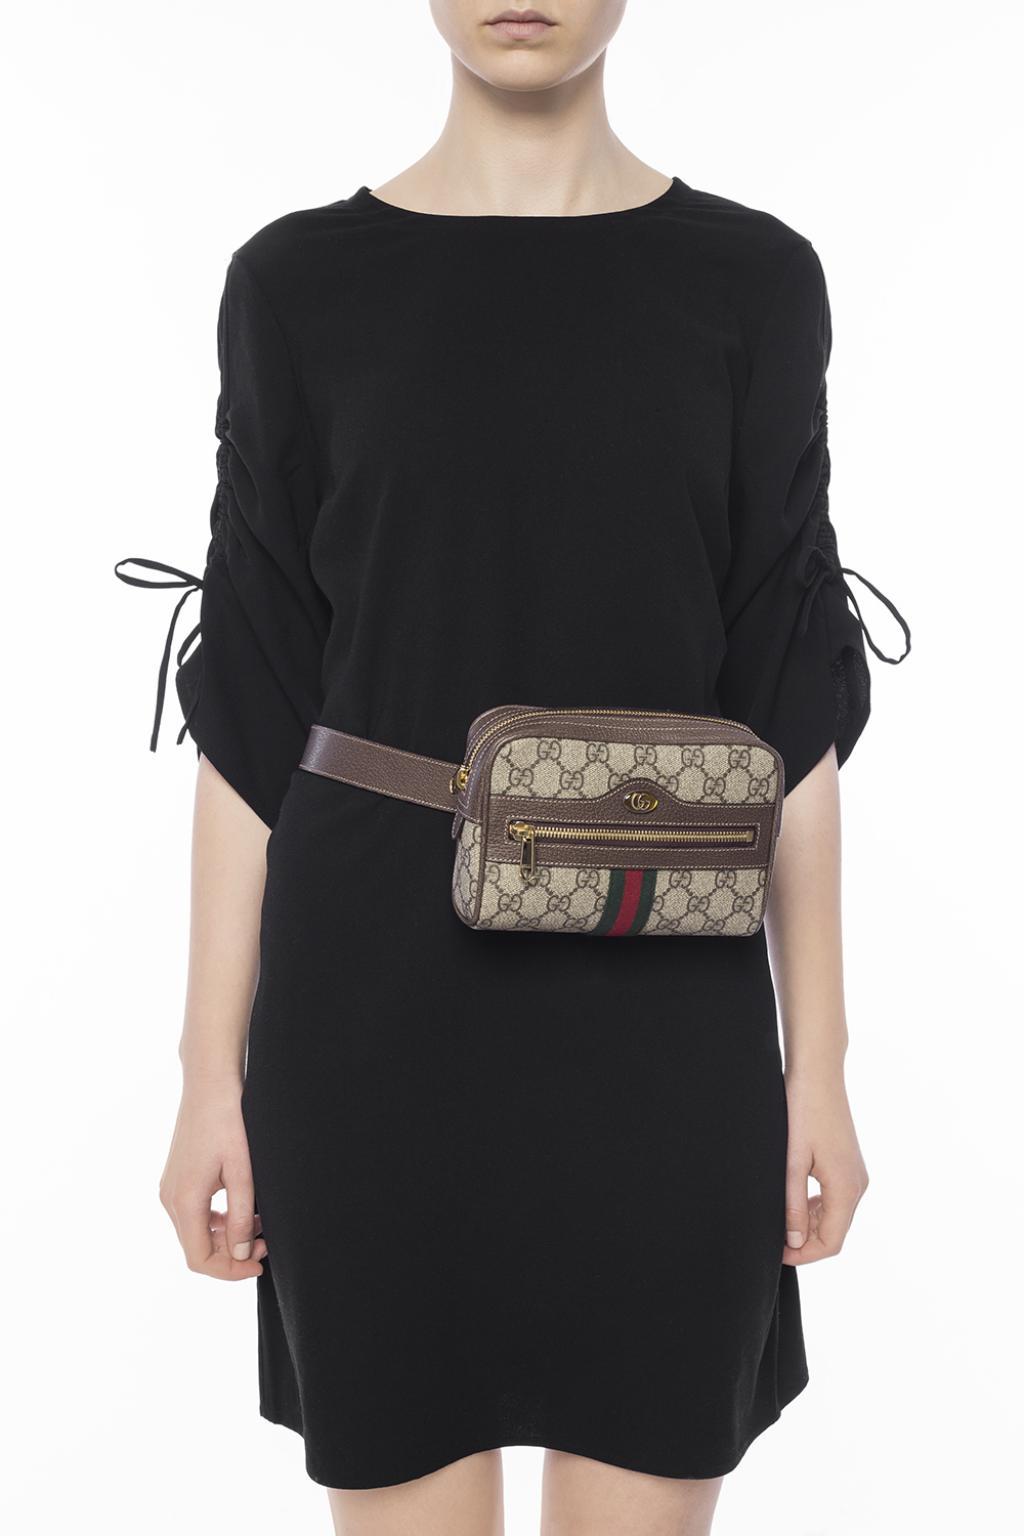 Gucci Canvas Ophidia GG Supreme Small Belt Bag Bag in Brown - Lyst